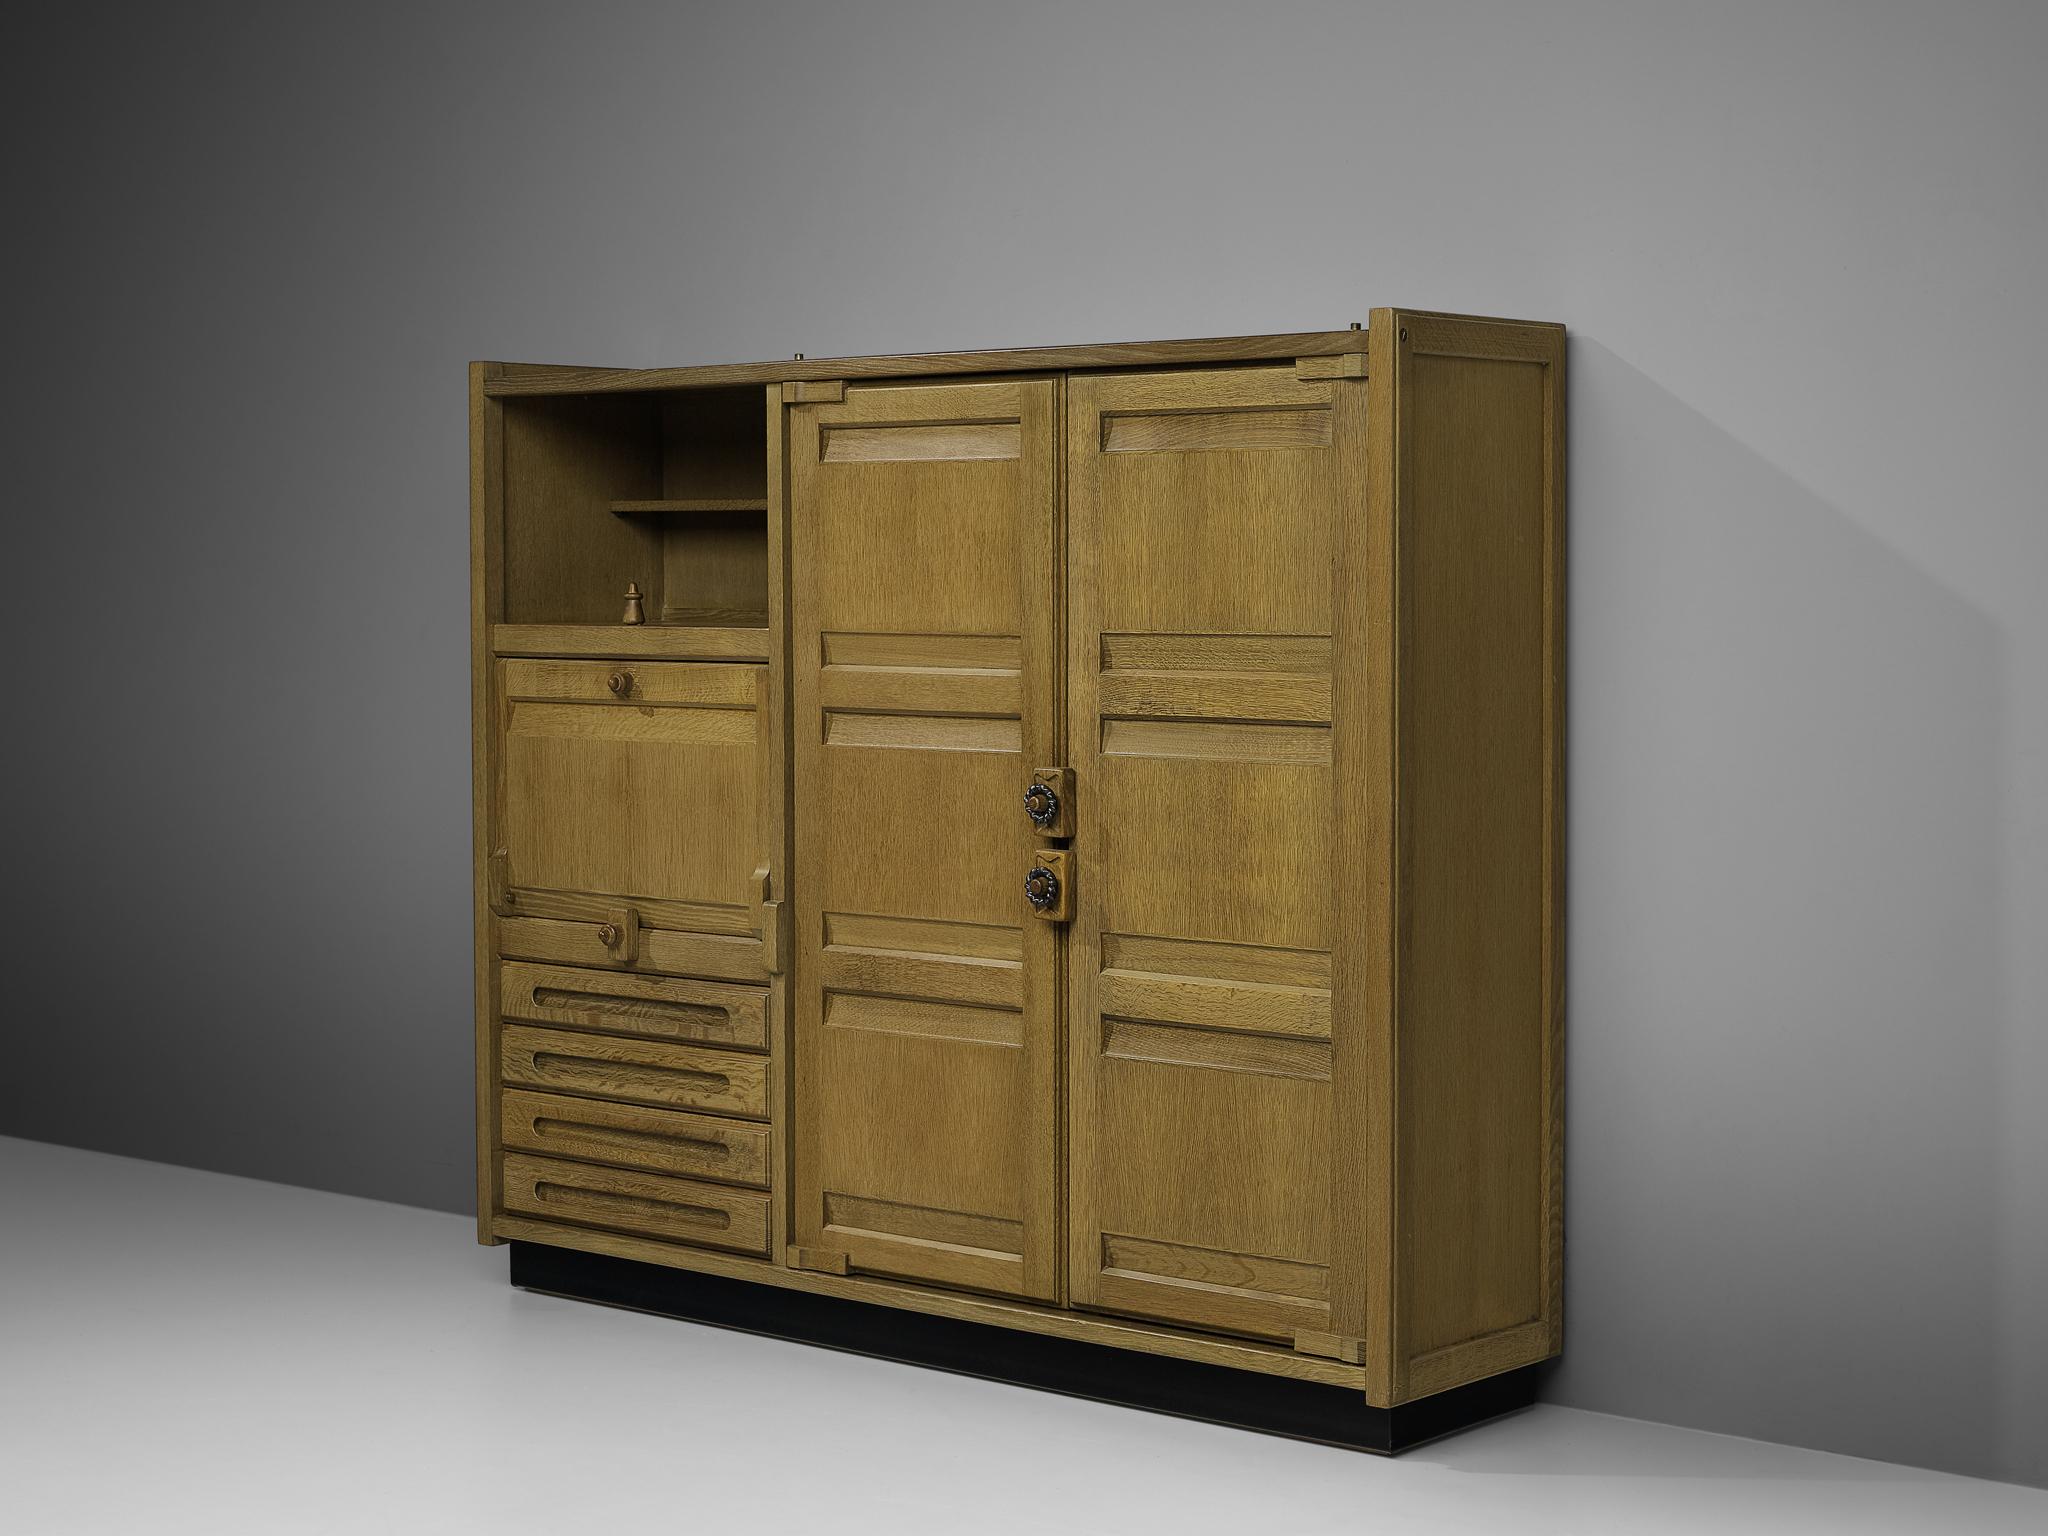 Guillerme et Chambron for Votre Maison, highboard, green stained oak, France, 1960s

Versatile highboard by French designer duo Guillerme et Chambron. Two high doors and one colum with drawers, an open and a closed shelf are allowing great storage